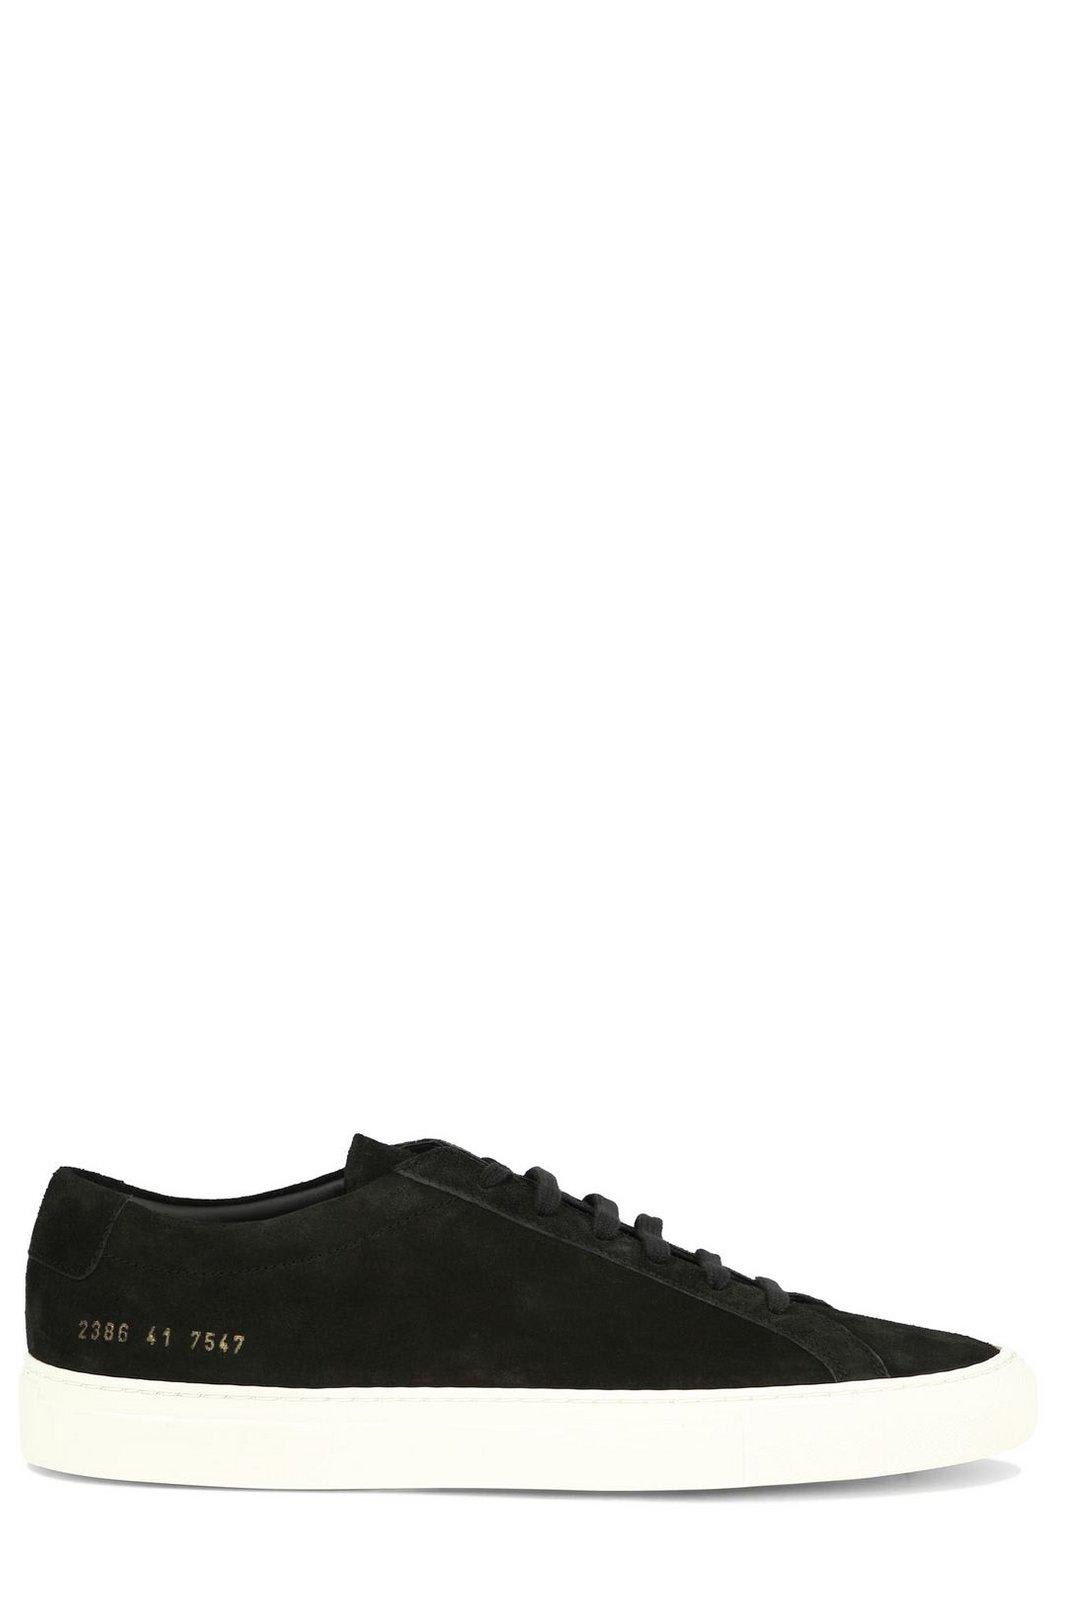 Common Projects Achilles Sneakers In Black Suede